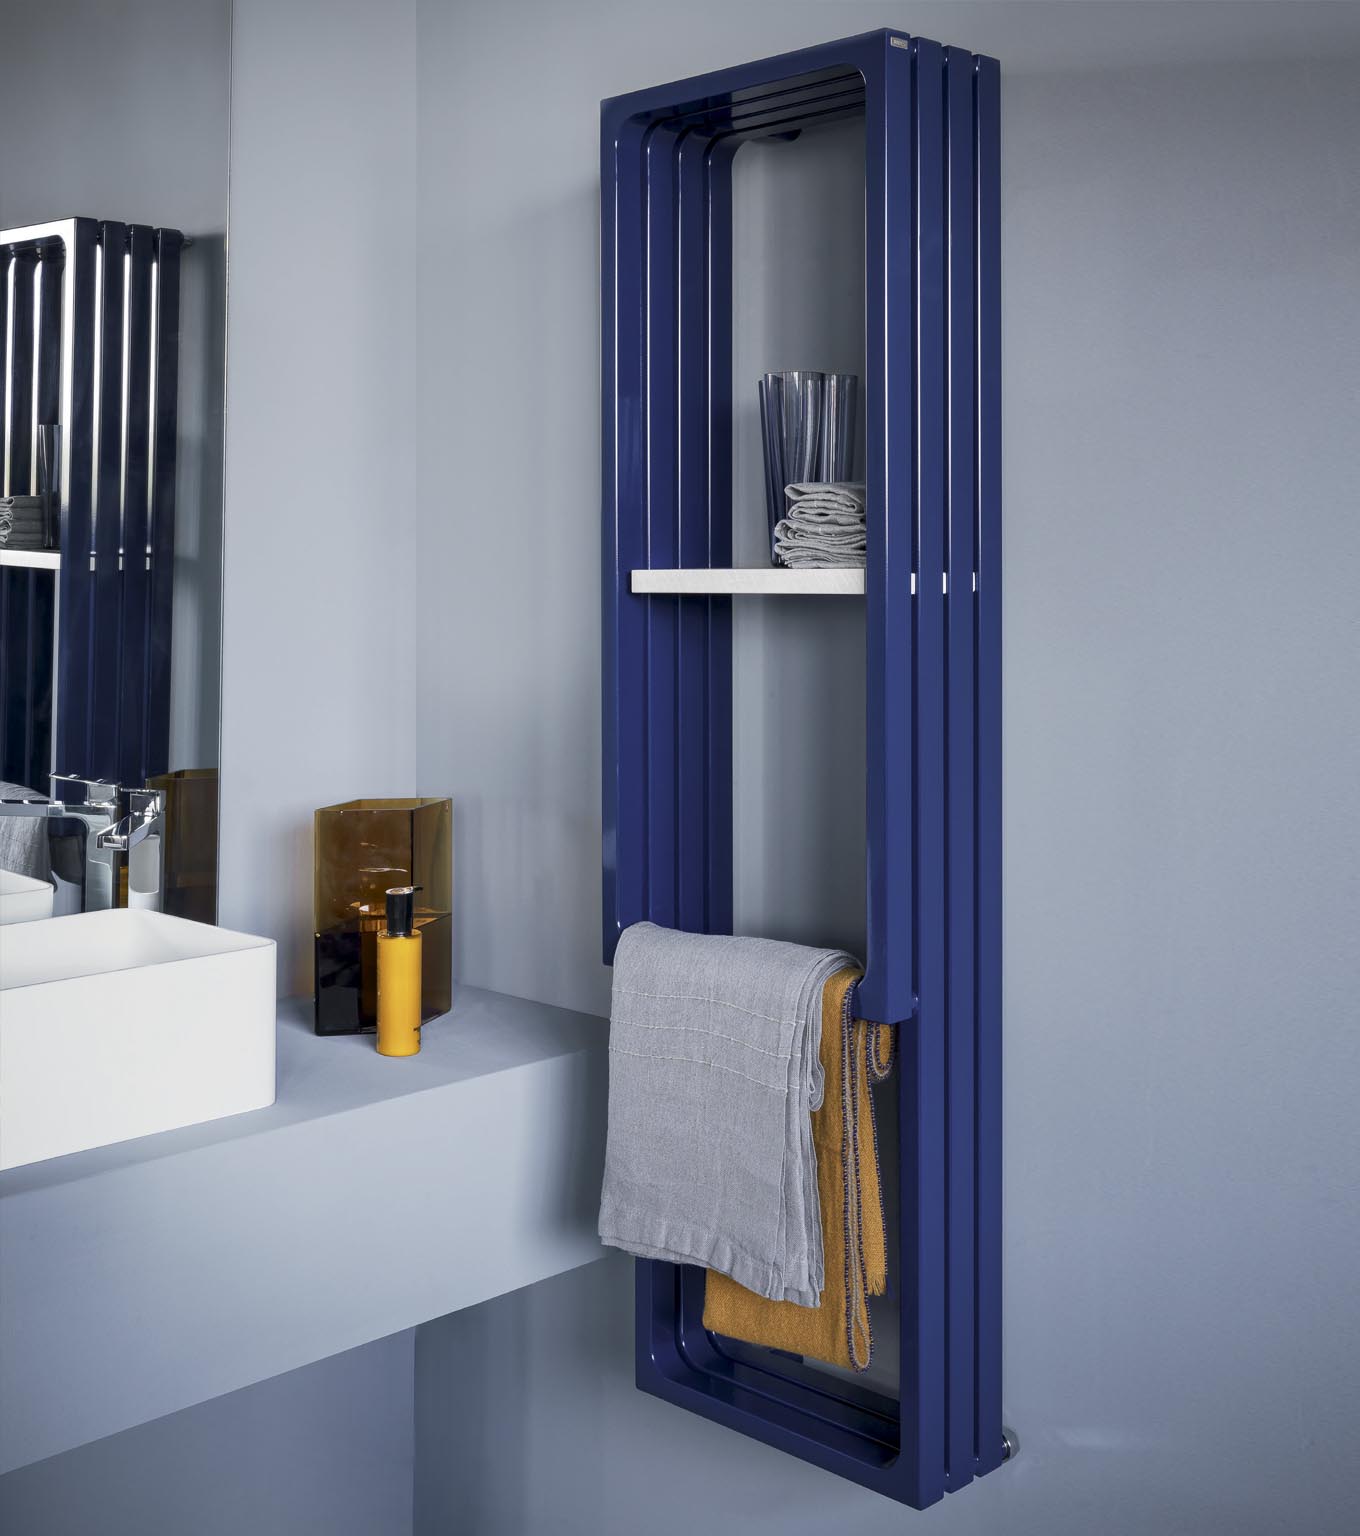 Montecarlo hydronic radiator in blue with shelving